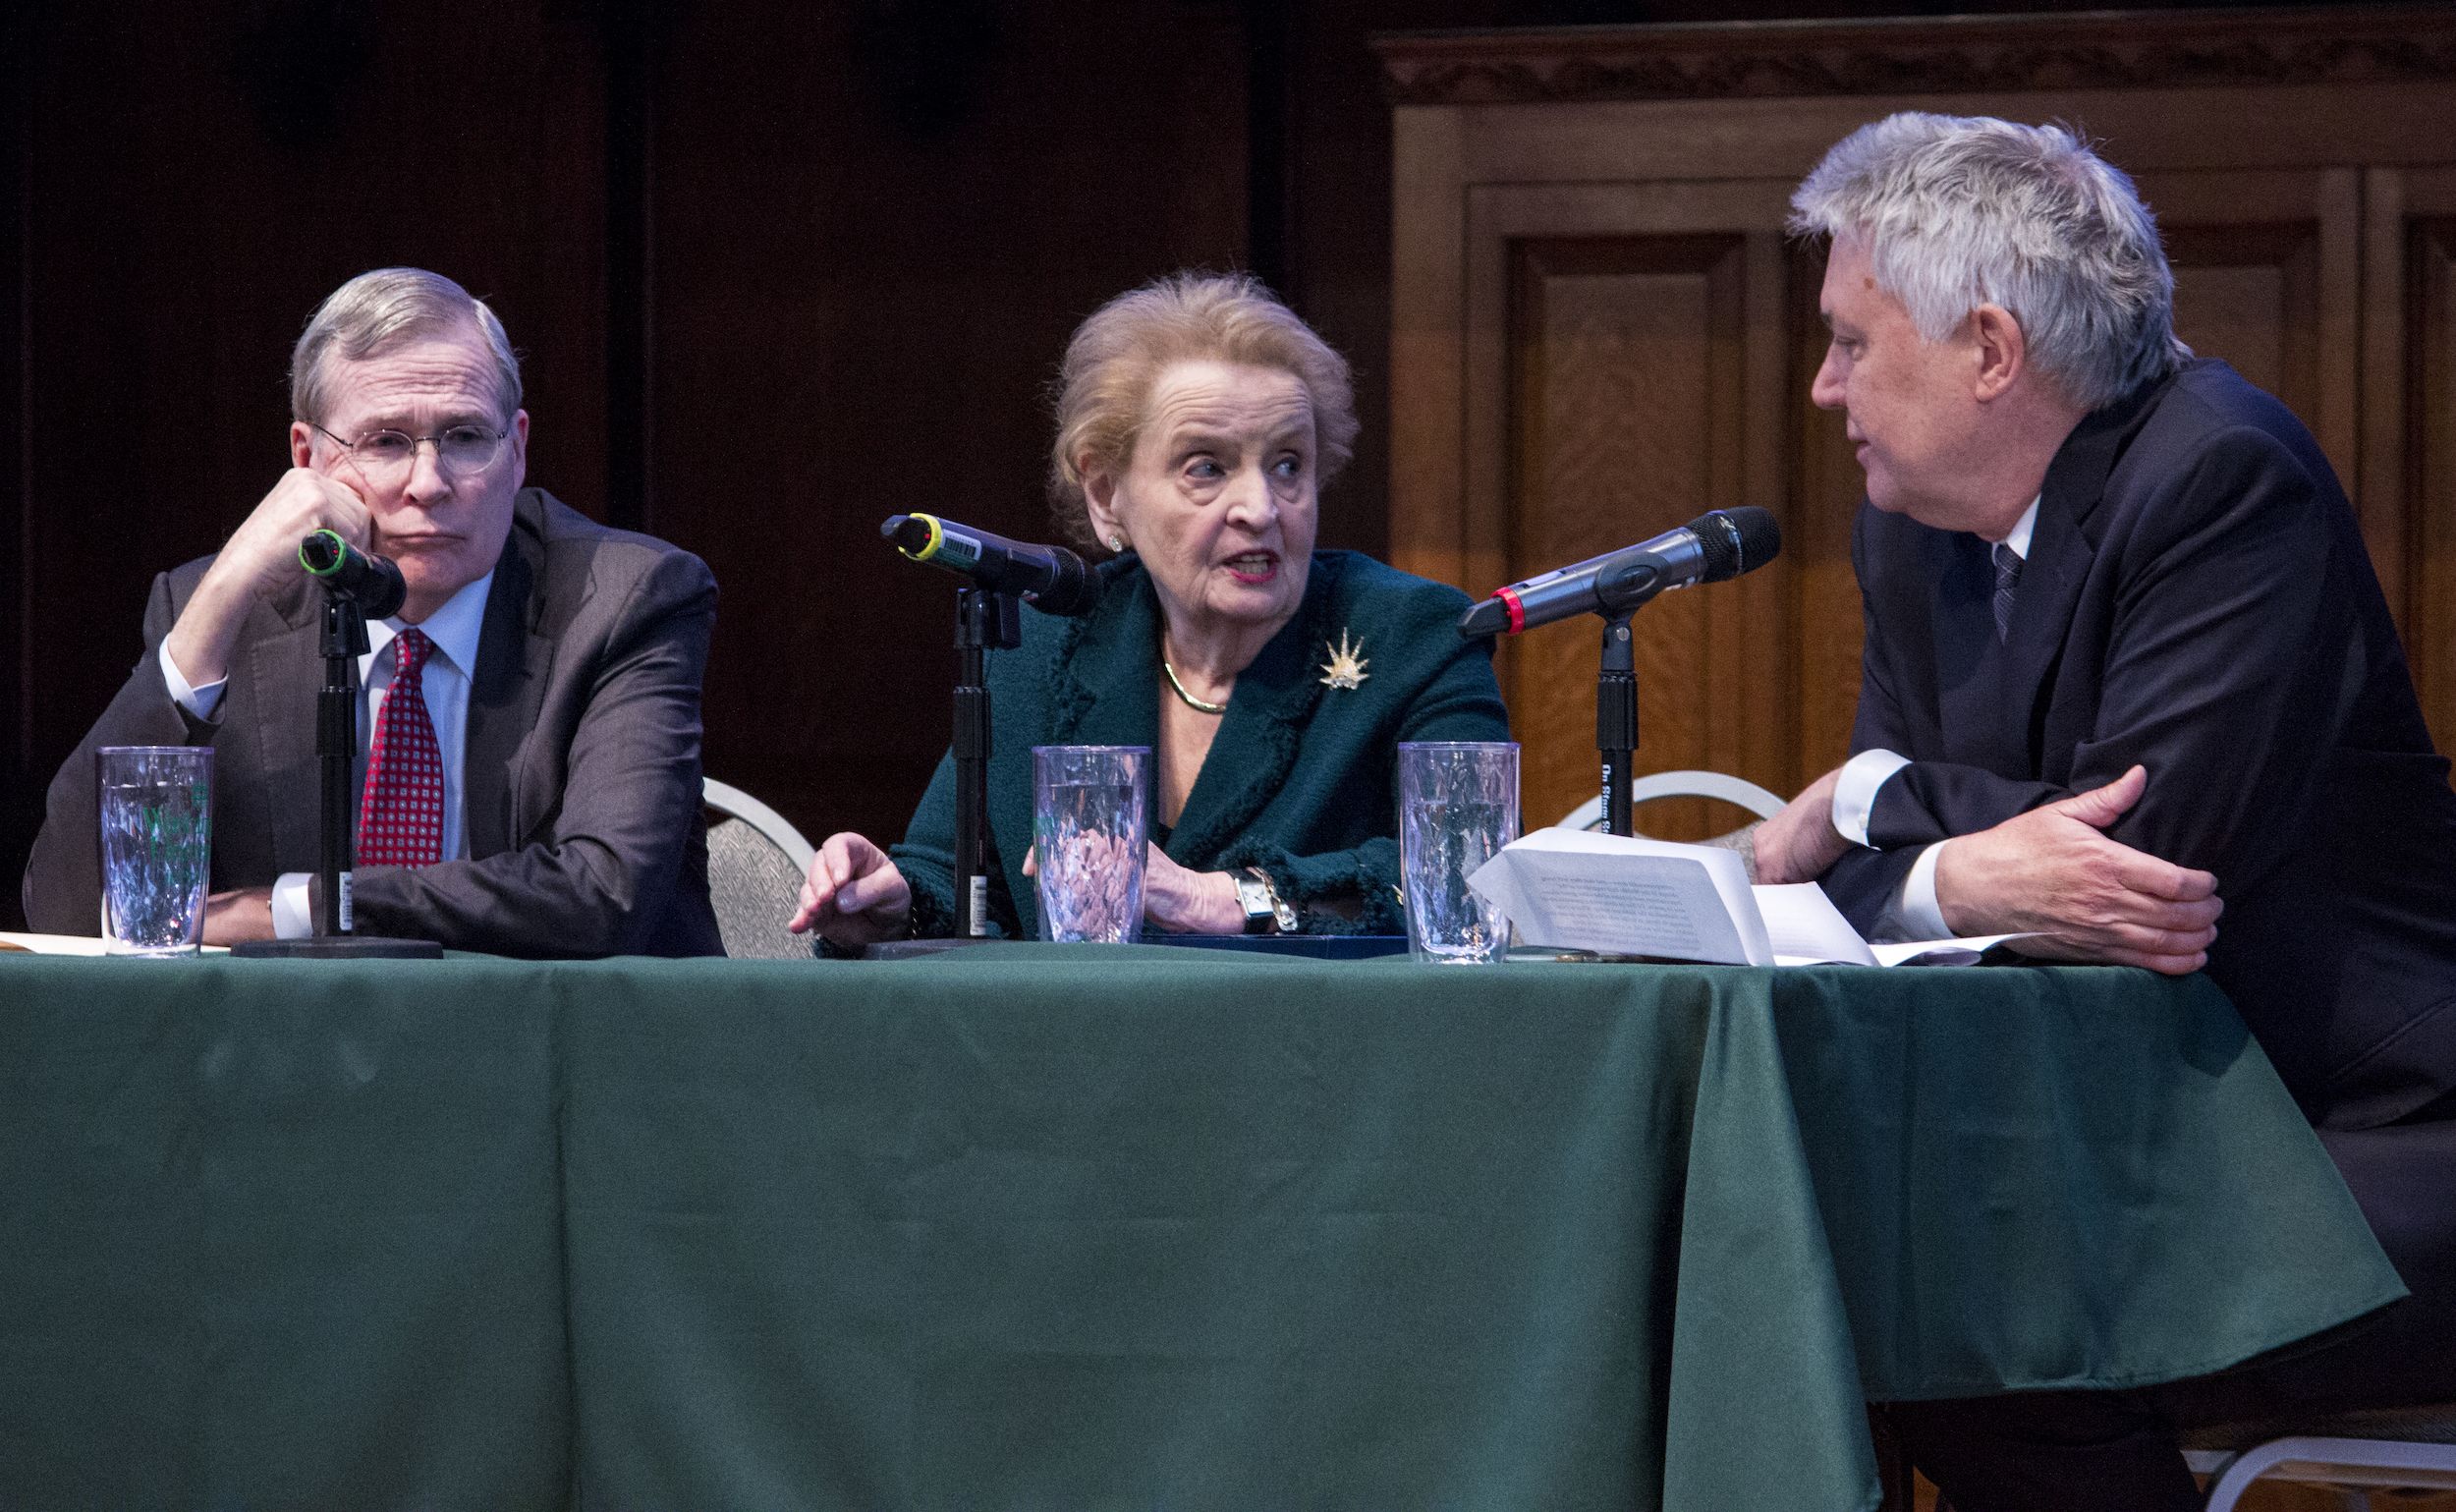 Jon Sawyer moderates a discussion between Madeleine Albright and Stephen Hadley surrounding the Middle East strategy at Washington University in St. Louis. Image by Lauren Shepherd, United States, 2017.